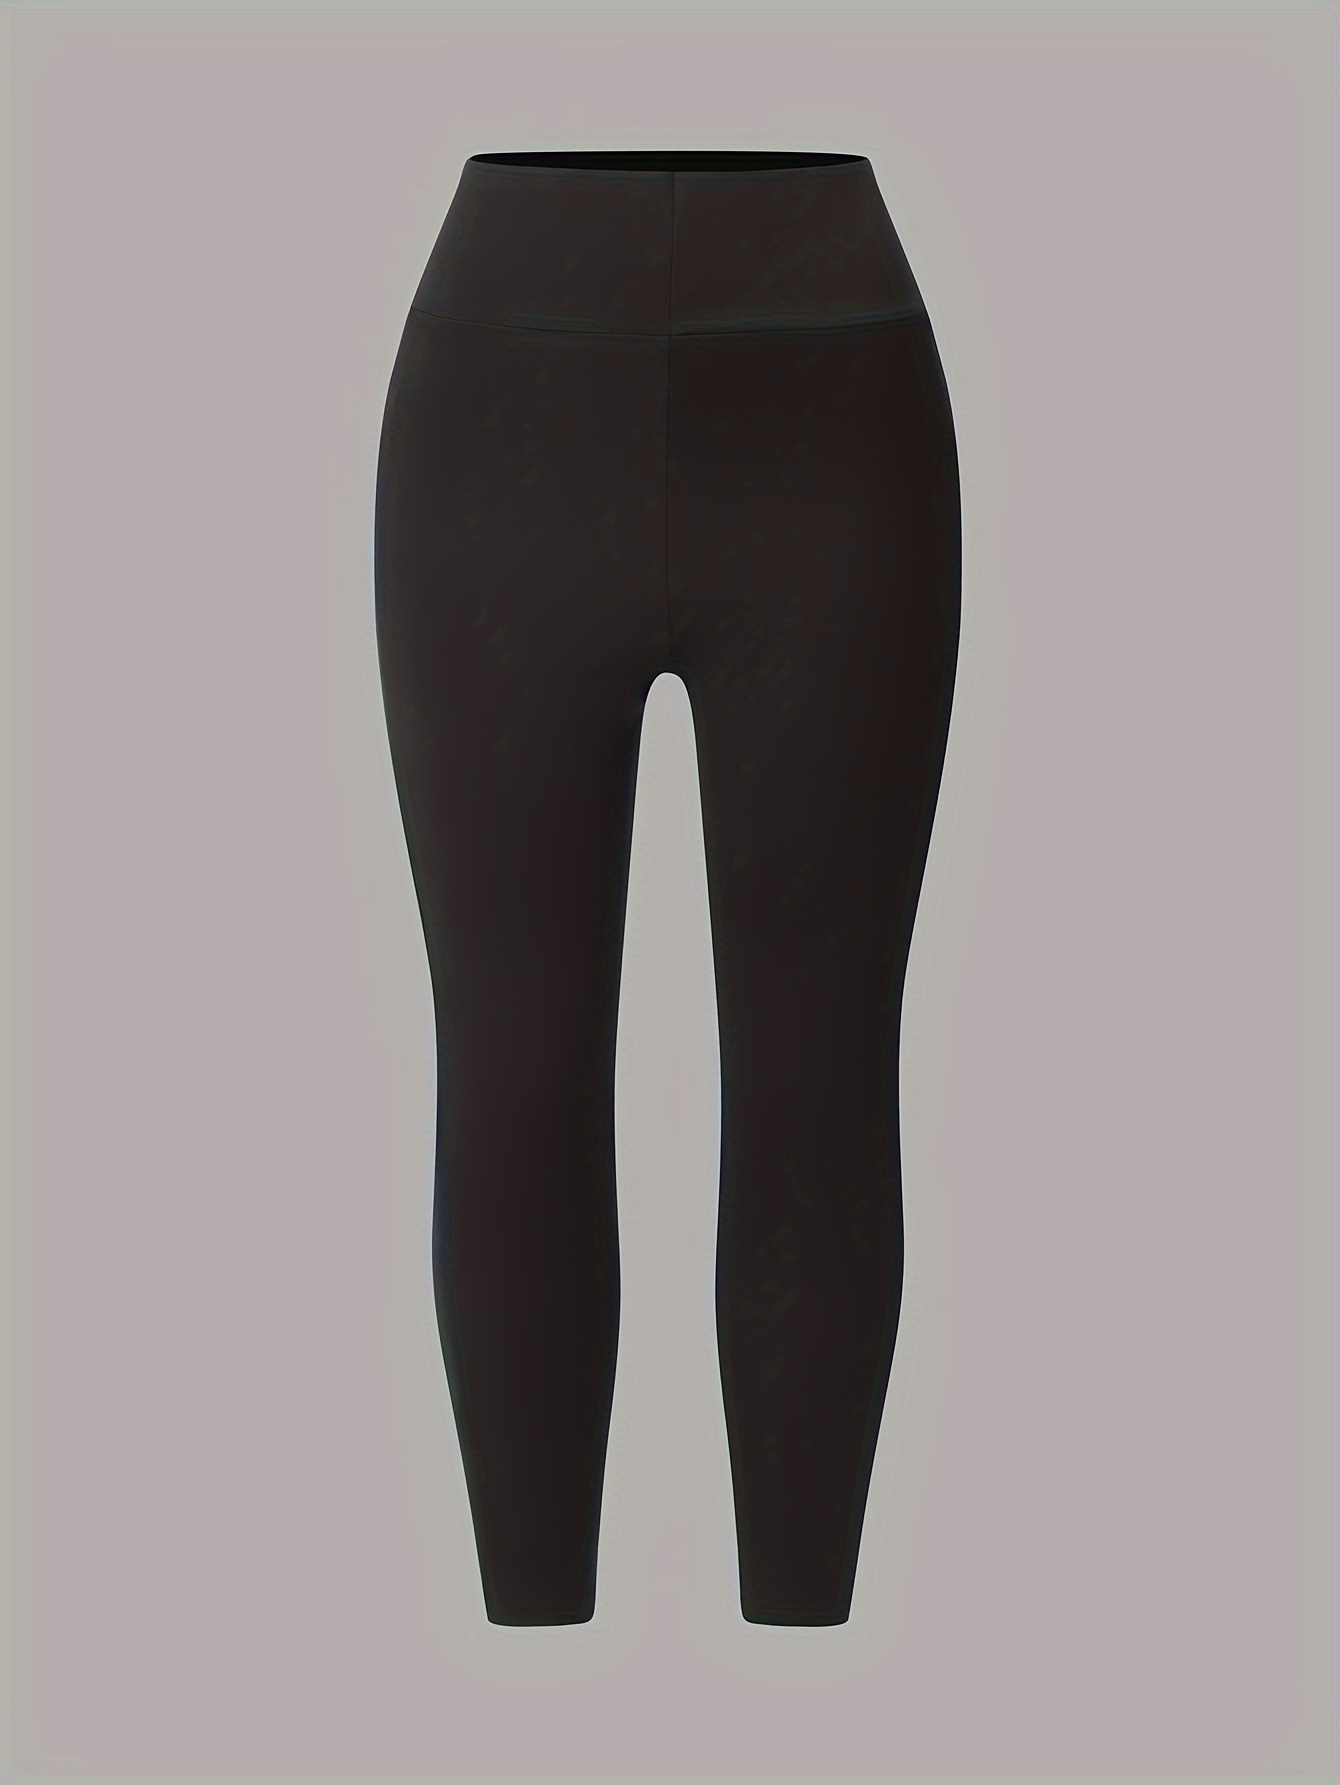 Plus Size Sporty Pants, Women's Plus Solid Wideband Waist High